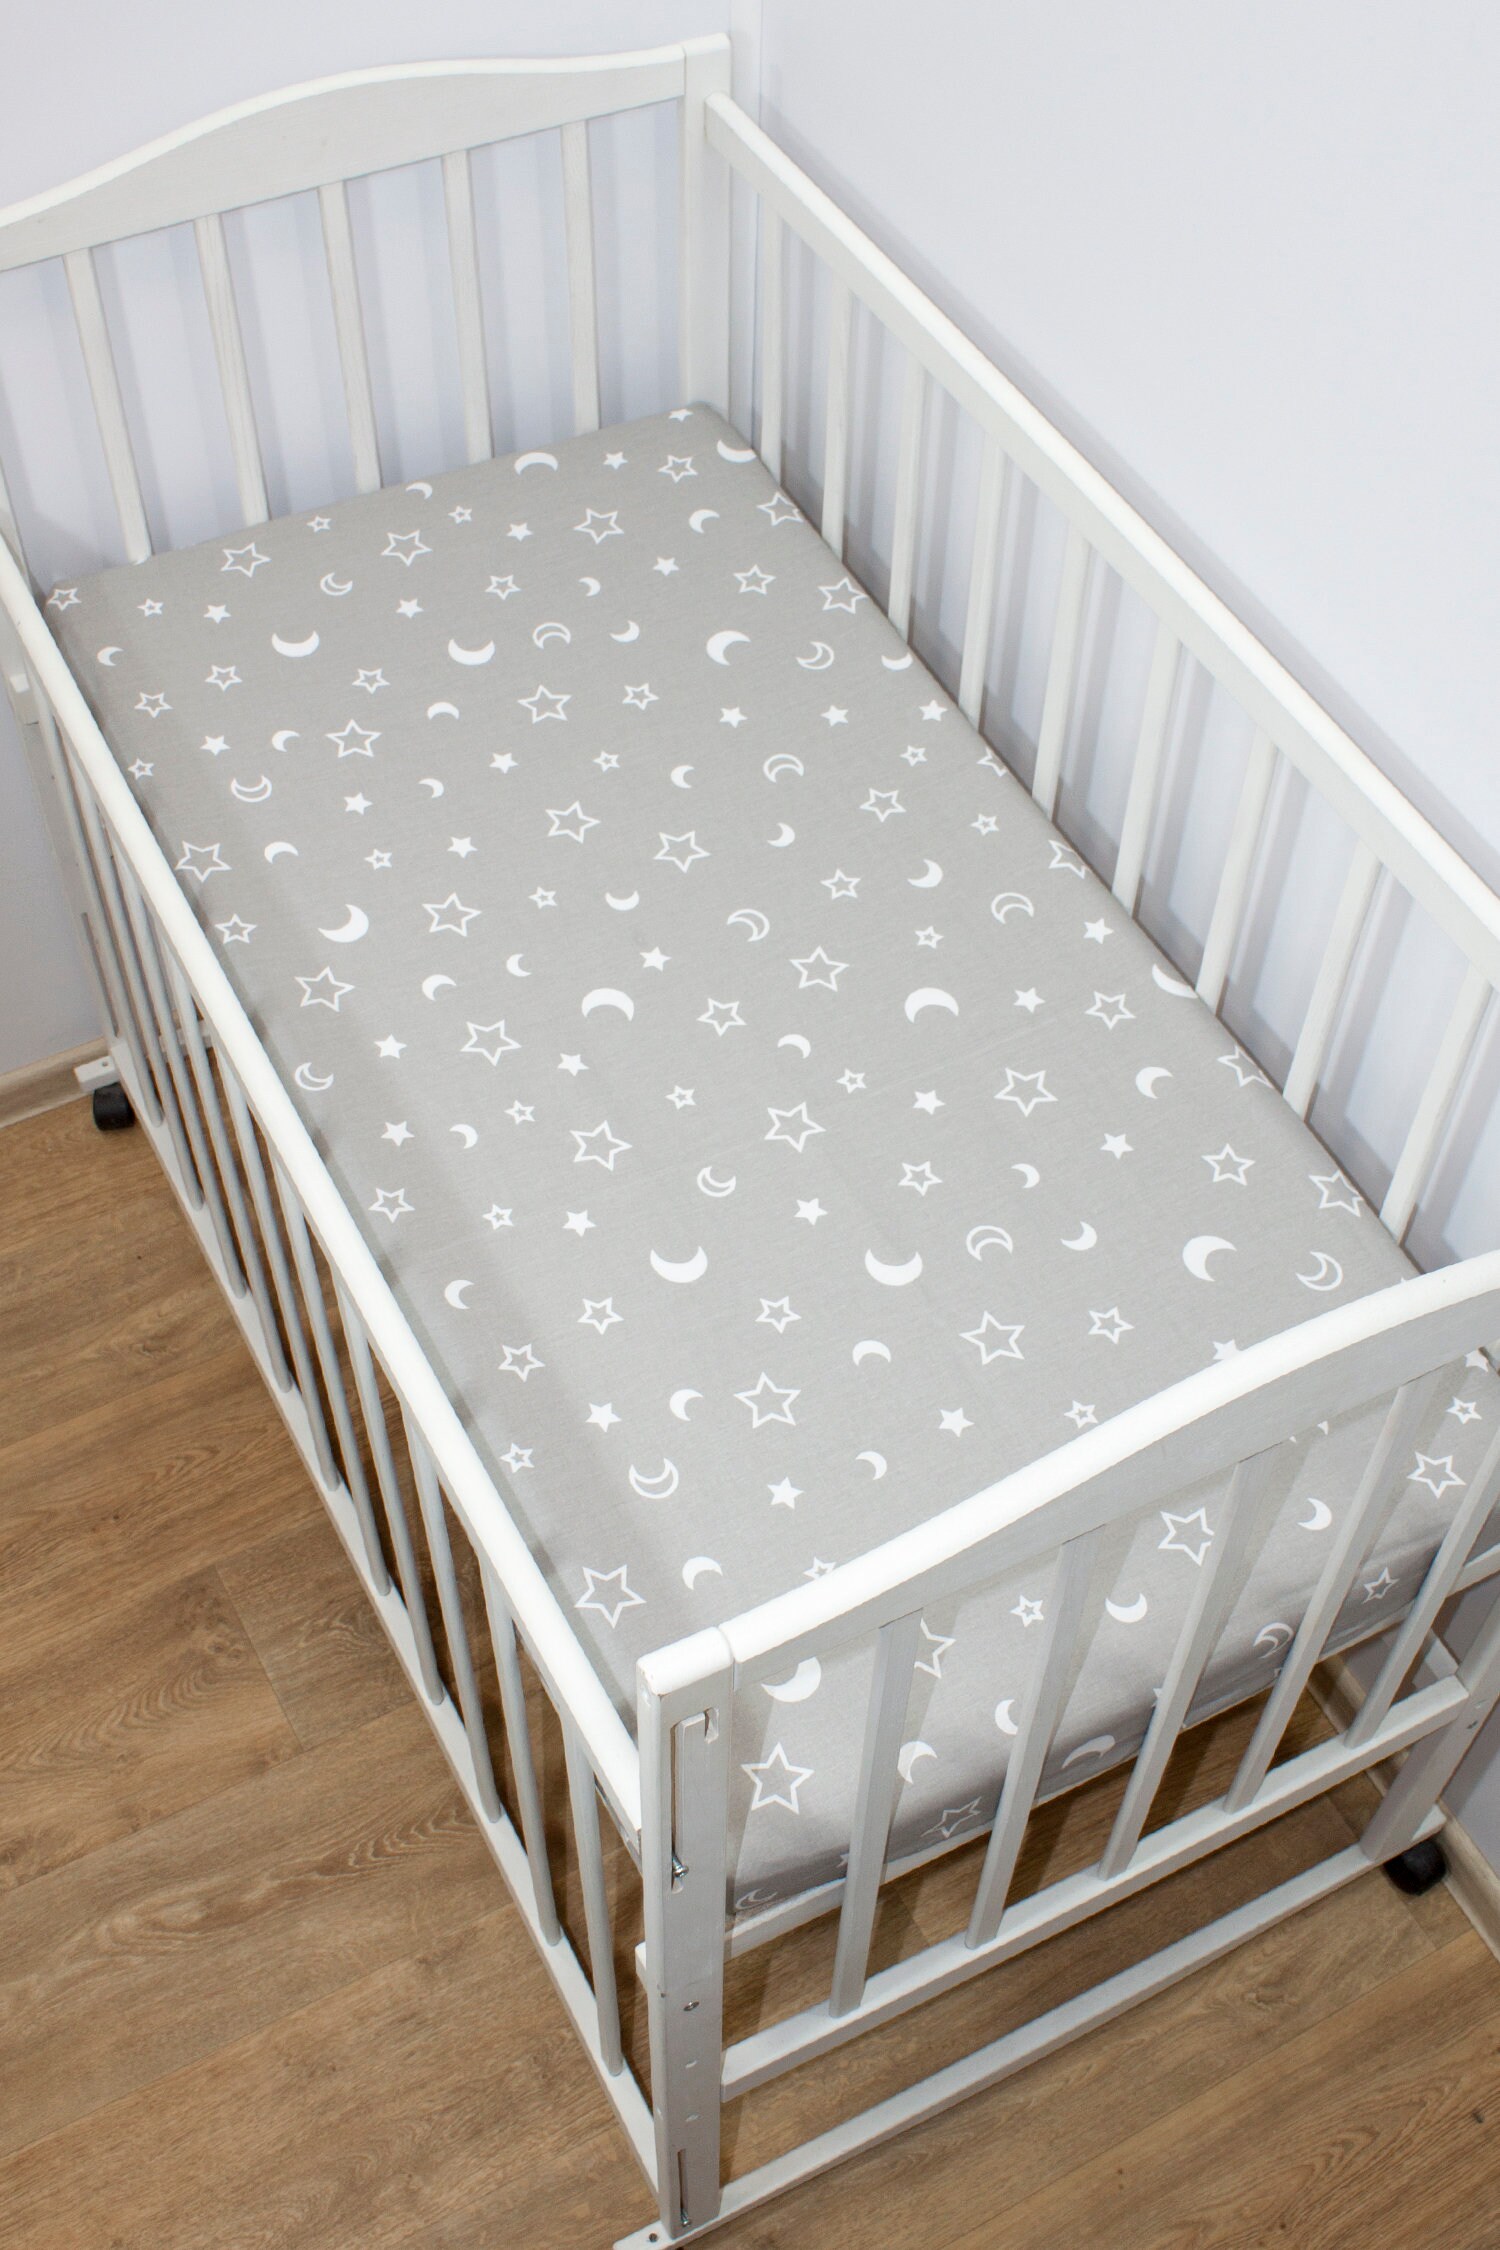 Cotton crib sheet with sleeping moon Neutral gender crib sheet Baby sheet night sky Stars and moon Gray fitted cot sheets Changing pad cover